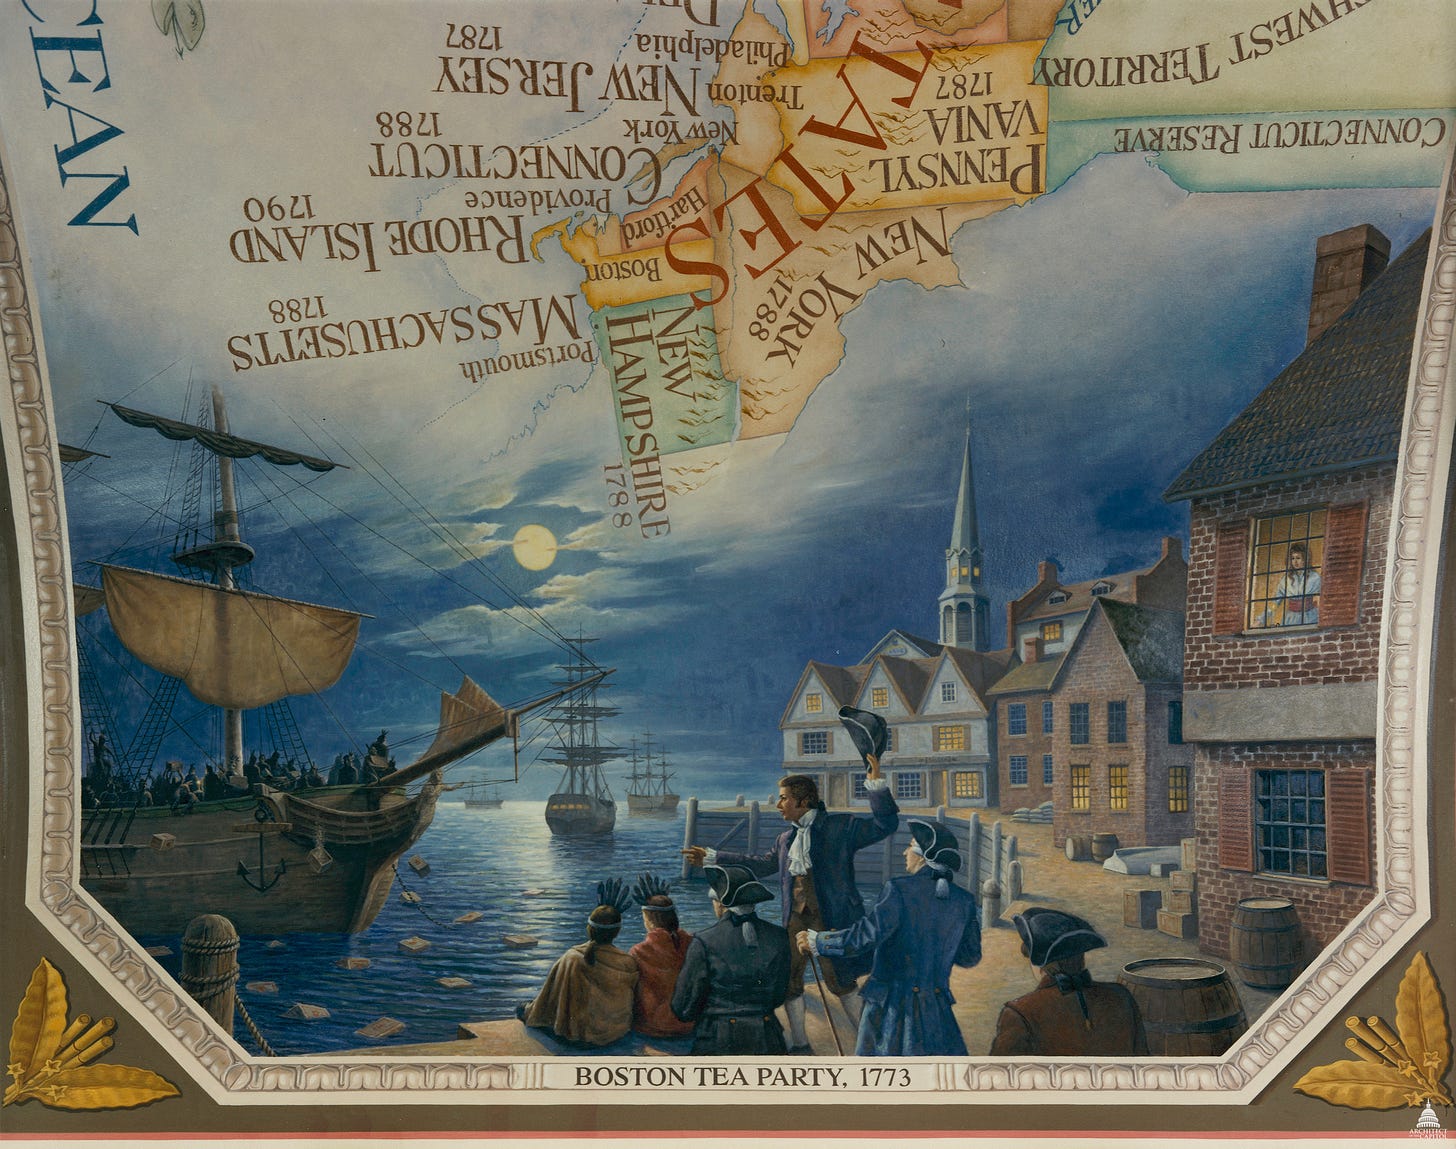 Architect of the Capitol painting: "Boston Harbor appears in a moonlit scene, with people dressed as Native Americans throwing crates of tea from a boat; this famous event led to the Revolutionary War."